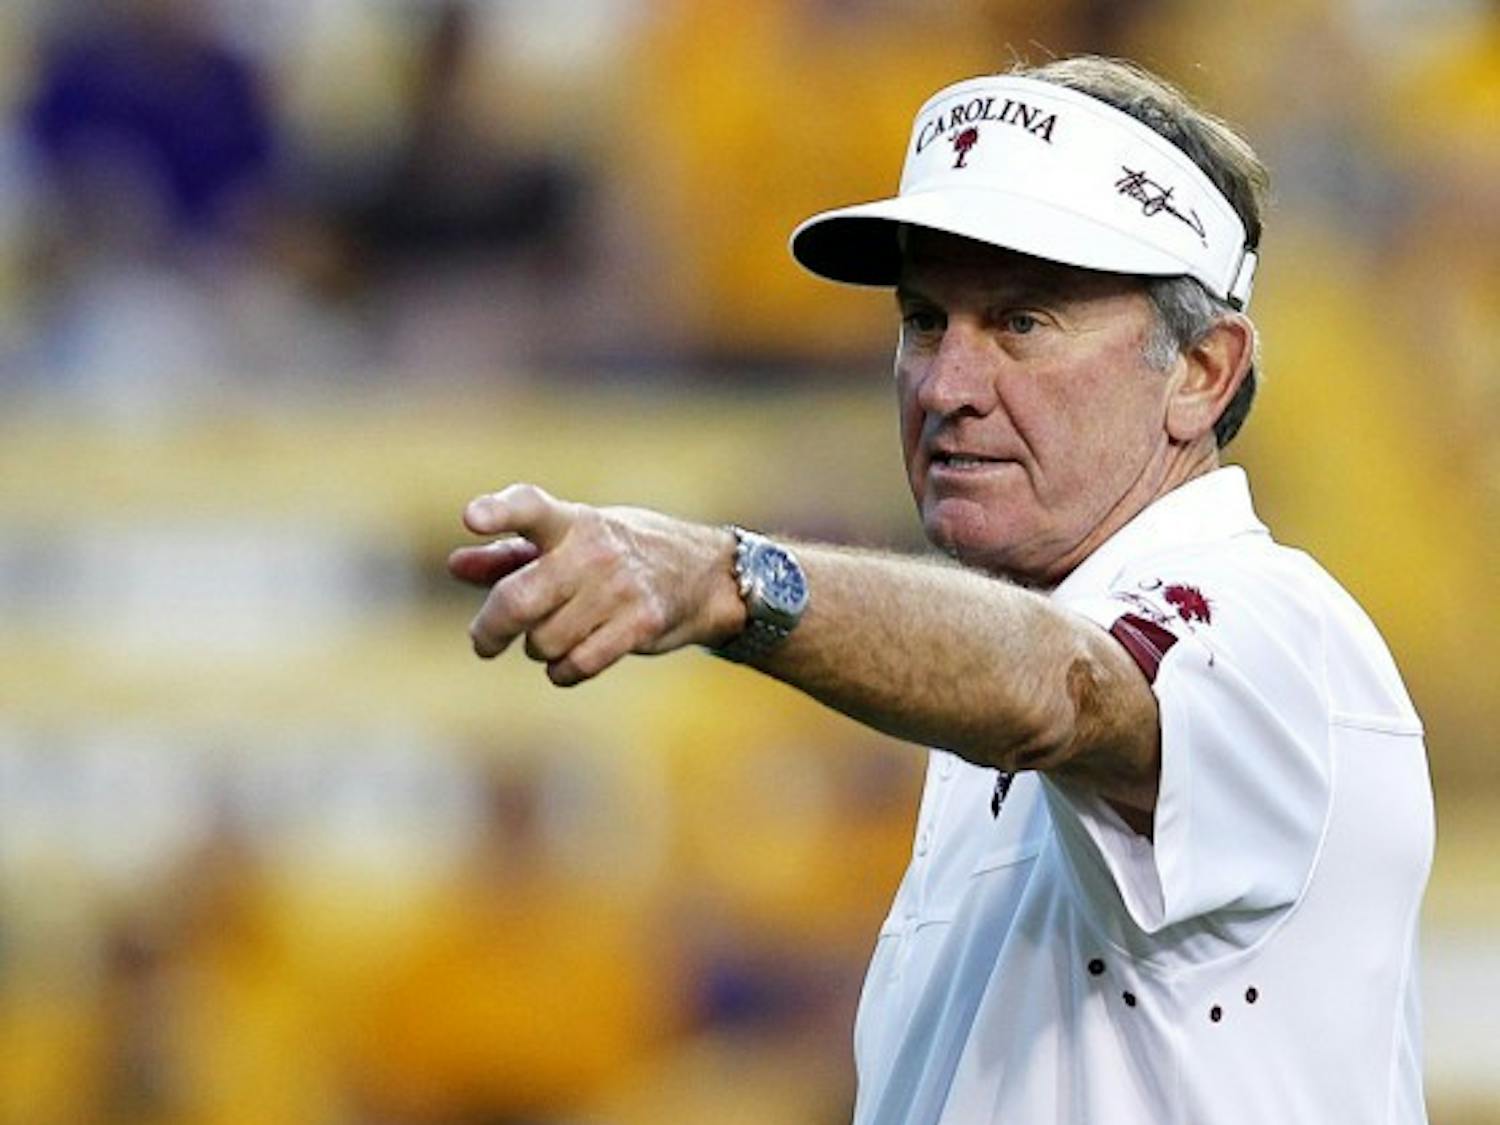 South Carolina coach Steve Spurrier calls out to his team before its NCAA college football game against LSU in Baton Rouge, La., Saturday, Oct. 13, 2012. (AP Photo/Gerald Herbert)